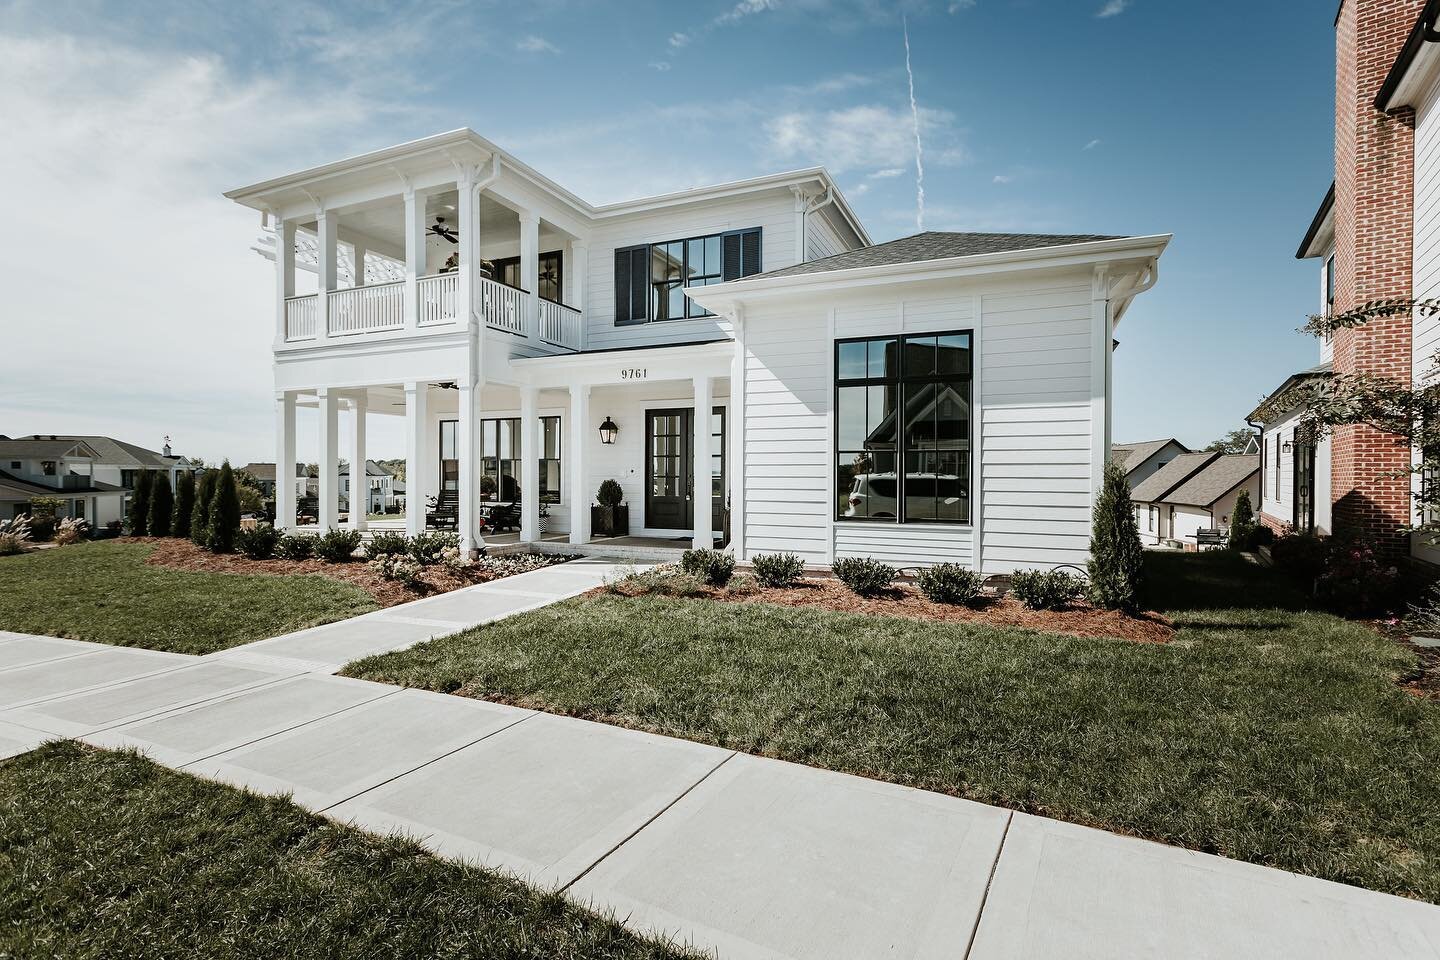 We wanted to feature some of our favorite homes we&rsquo;ve built in the Northshore Town Center over the past few years. Photos by @_chrissmithphotography_ #newconstruction #customhomes #exteriordesign #architecture